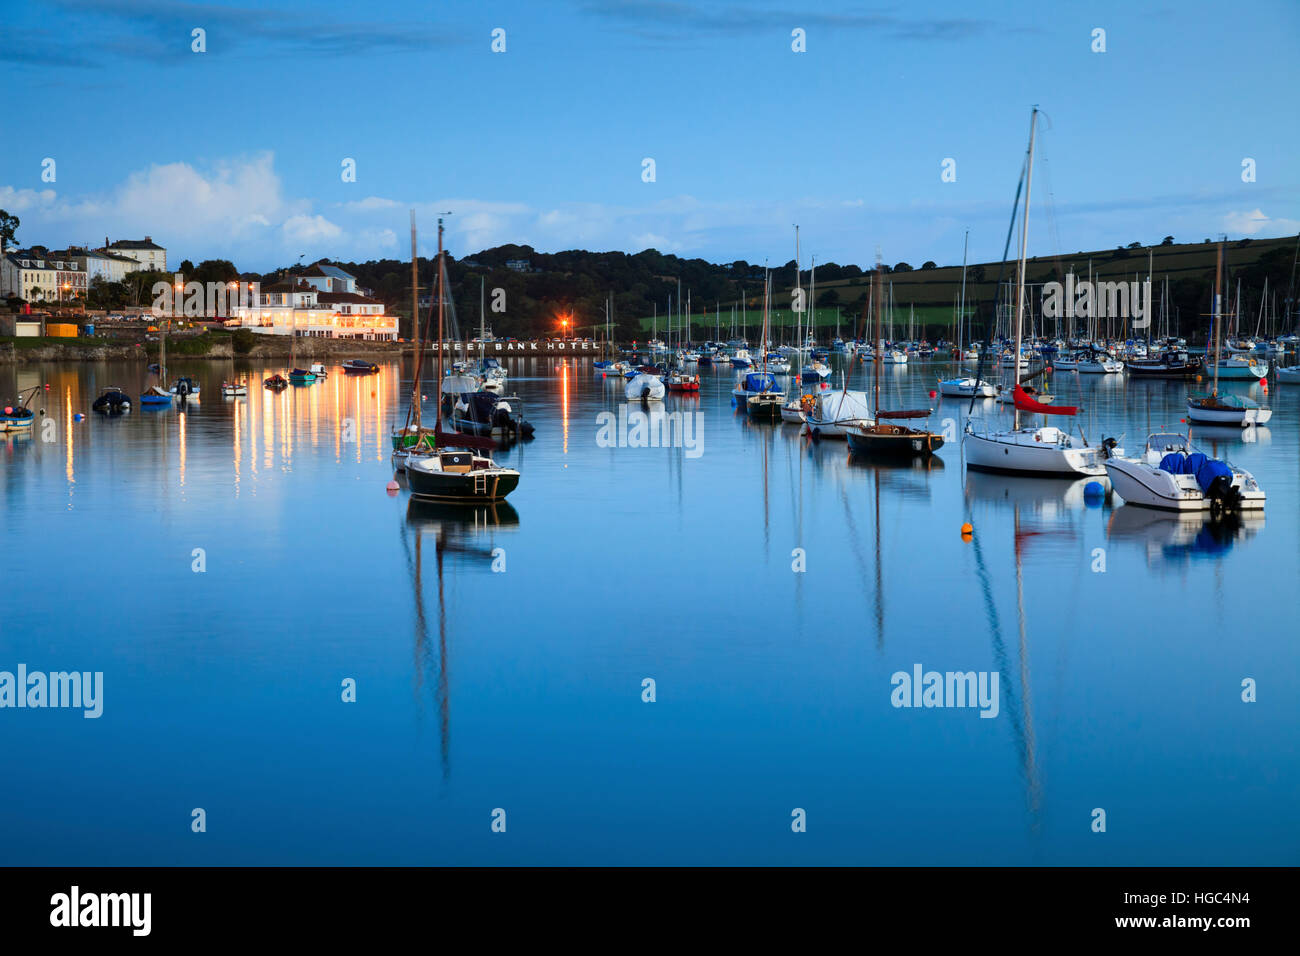 The Greenbank Hotel captured from the Prince of Wales Pier at Falmouth. Stock Photo